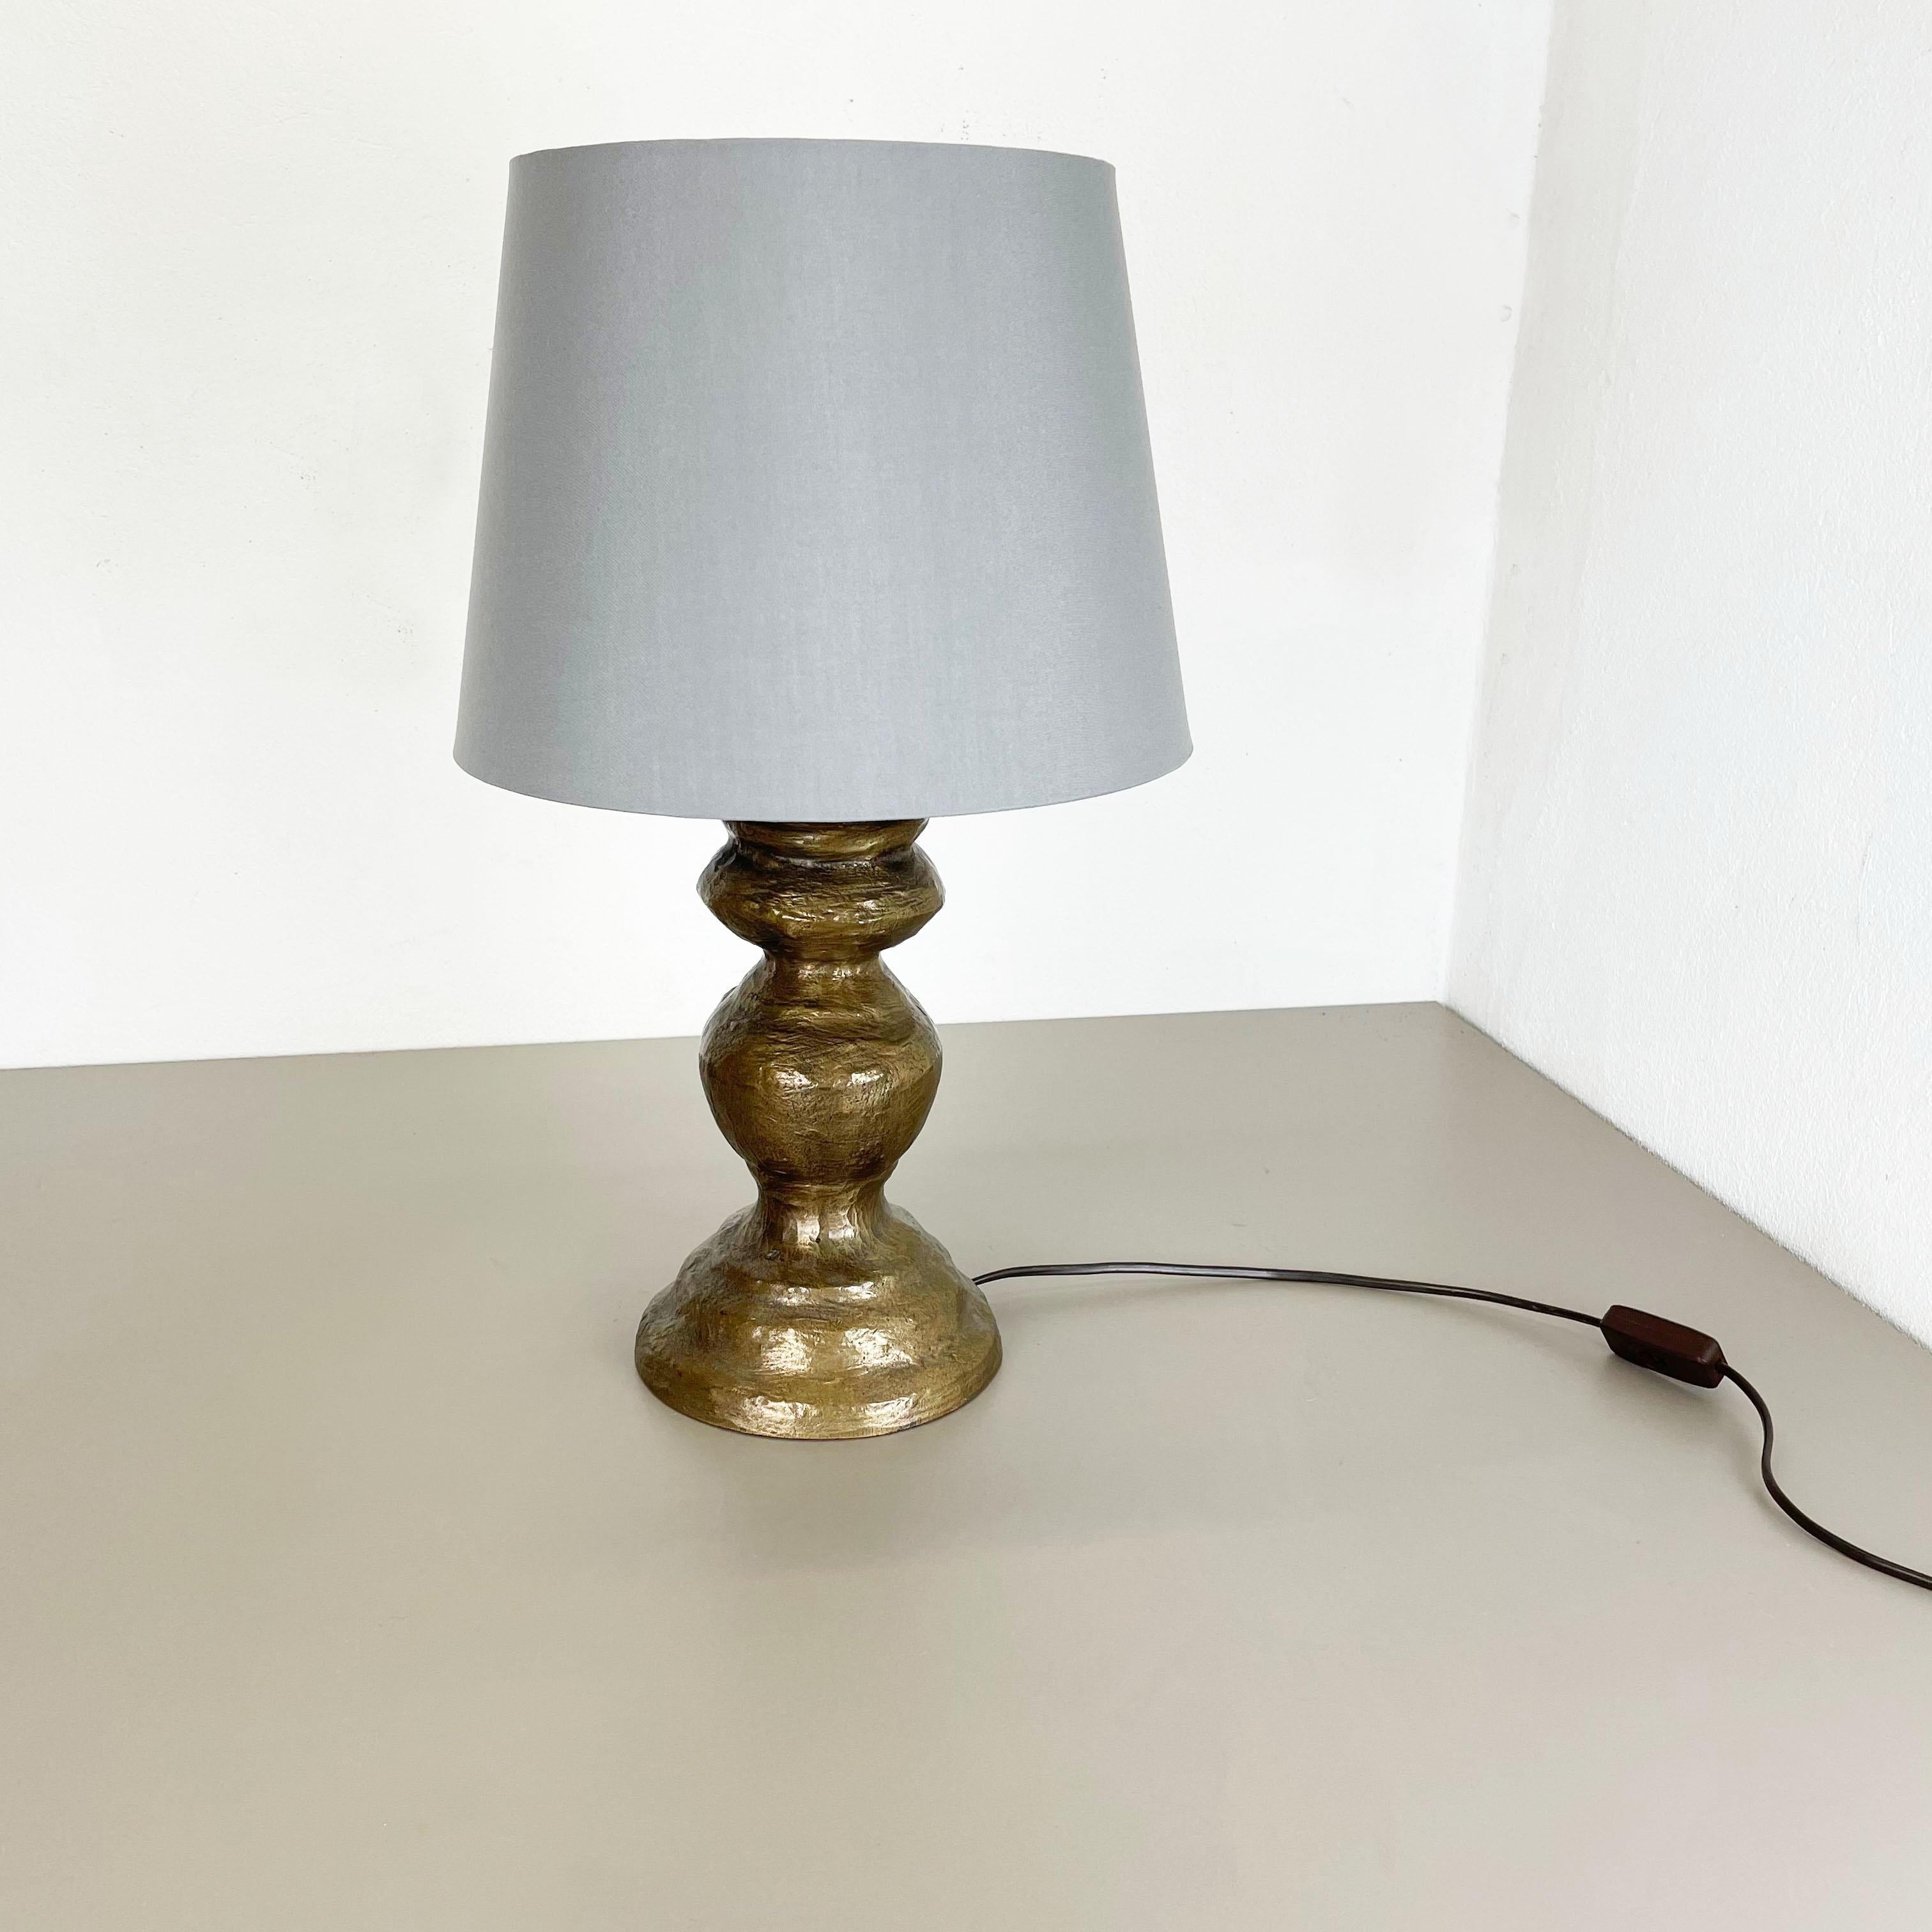 Article:

table light


Origin:

Austria


Age:

1960s


This original vintage table light was designed and produced in the 1960s in Austria. The super rare and Minimalist light stand element has a unique brutalist form and is made of bronze. The